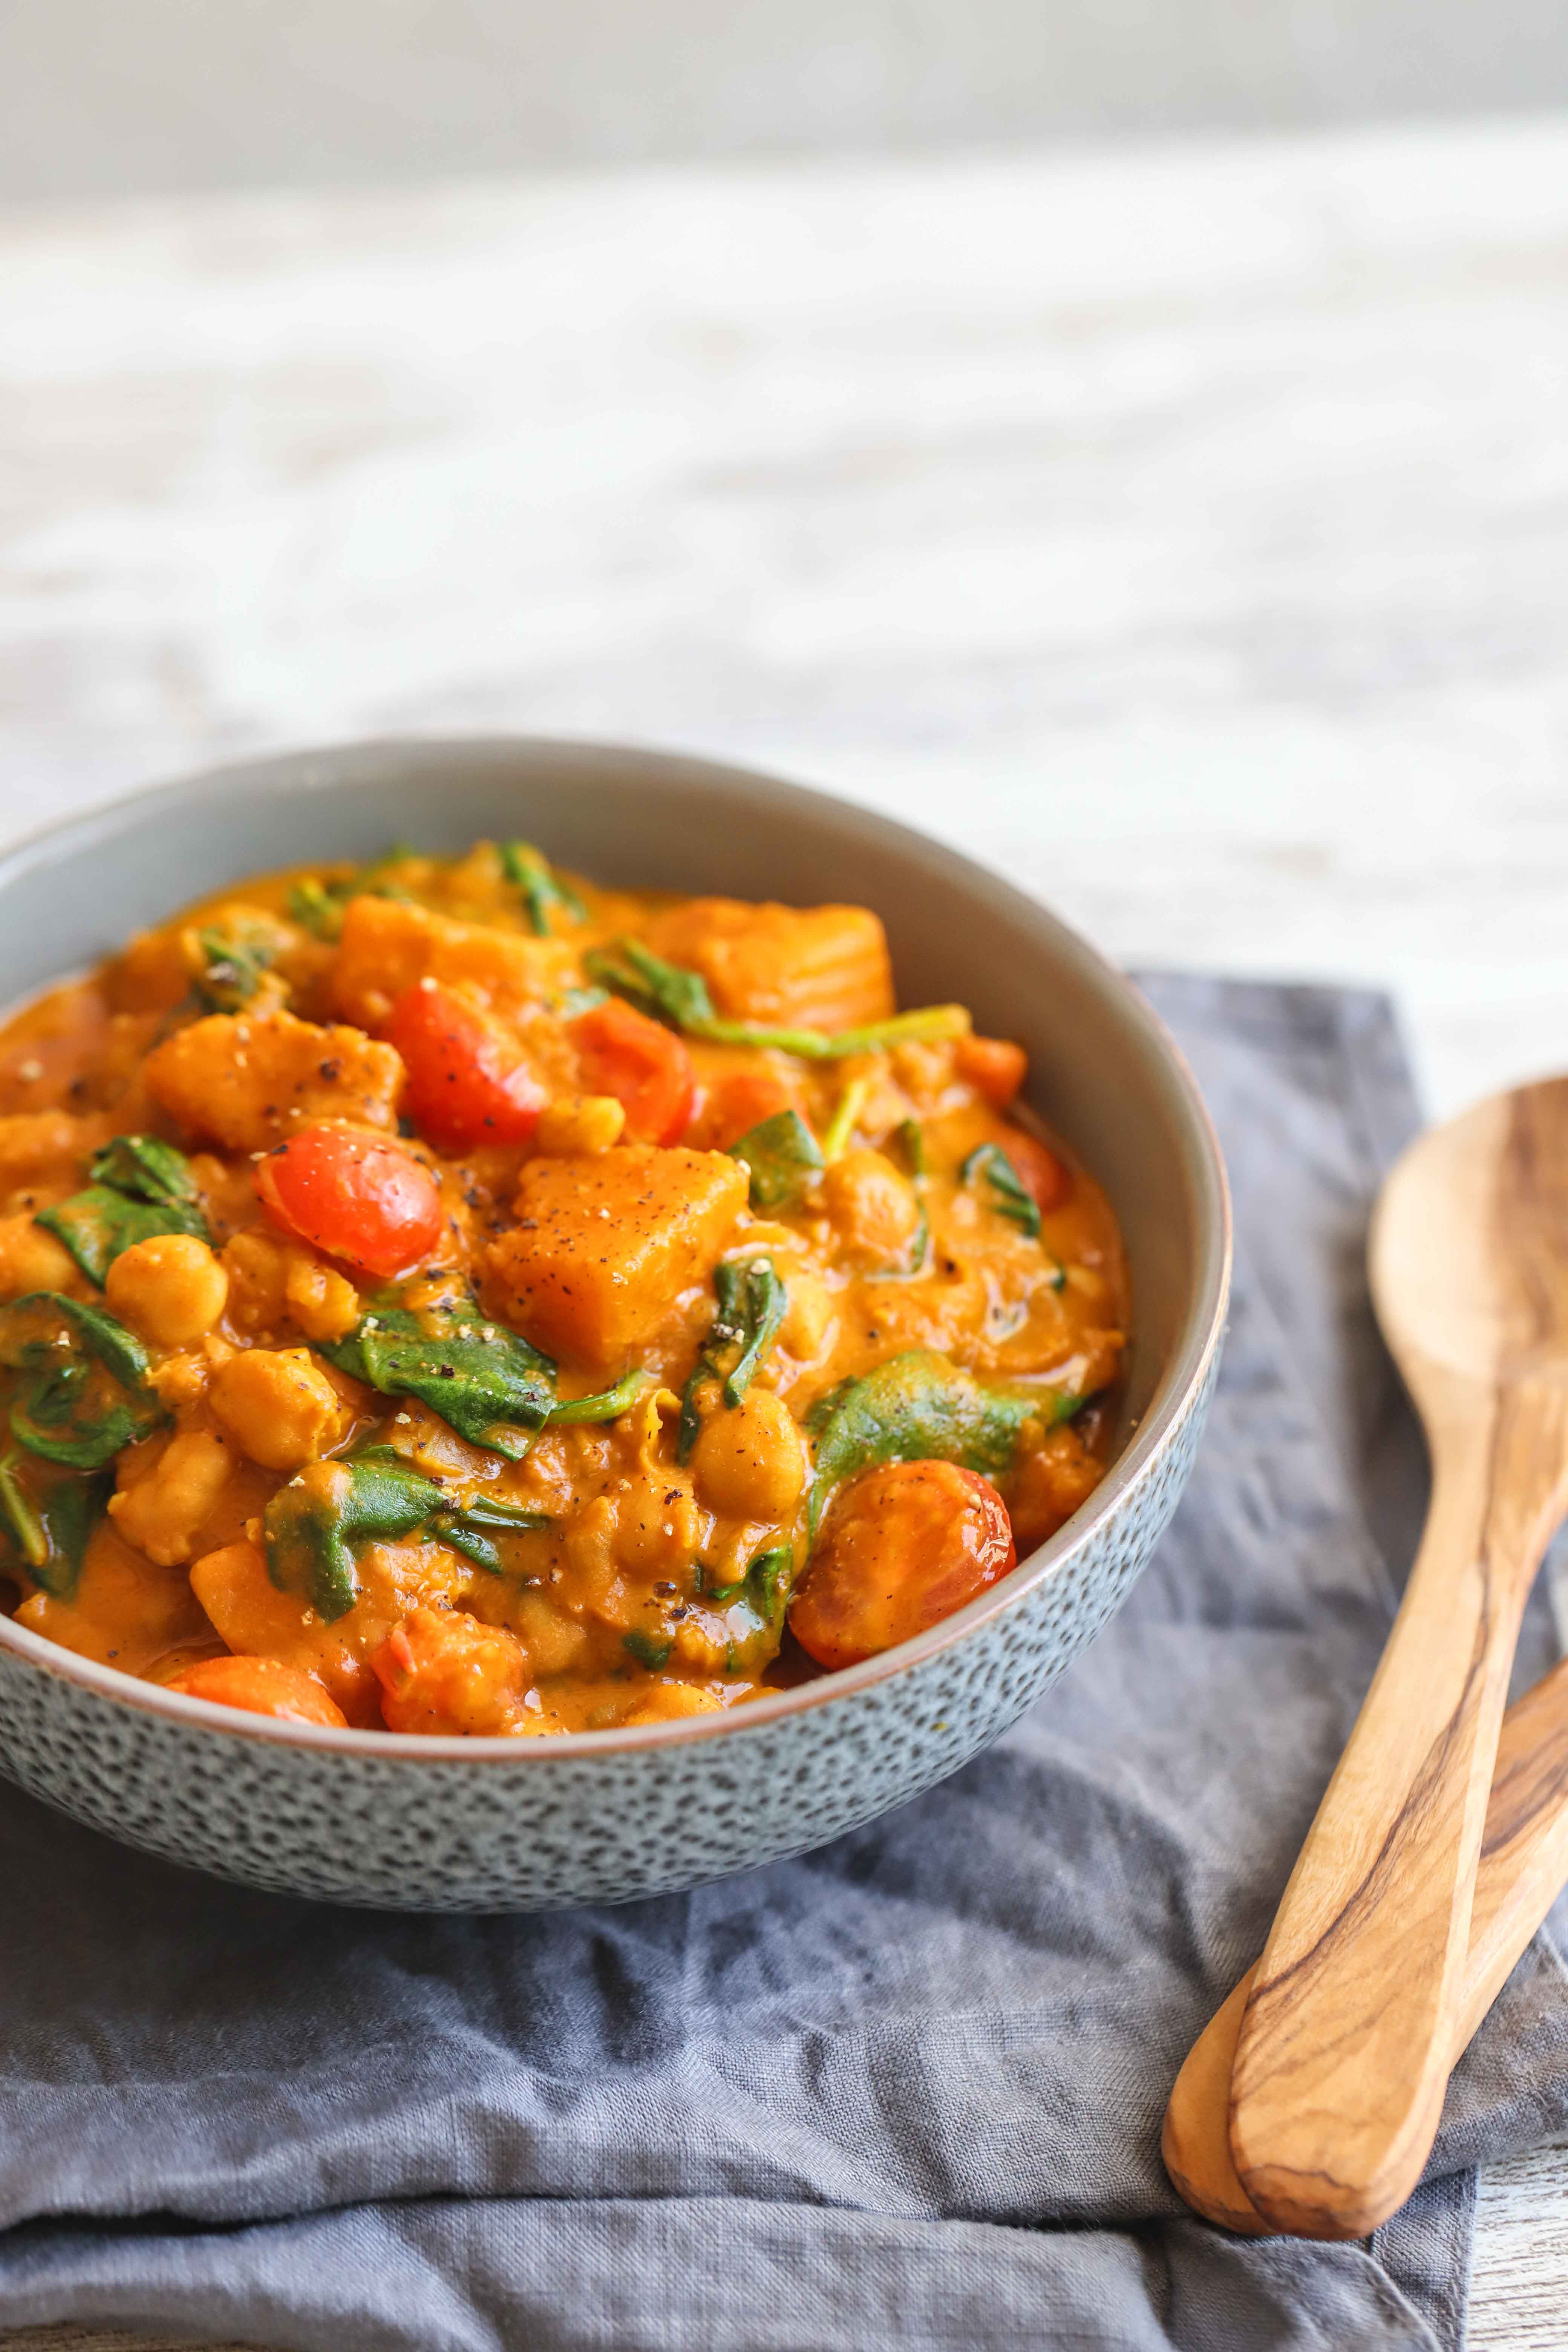 Chickpea and pumpkin curry, for when you want a quick and easy meat free Monday recipe.